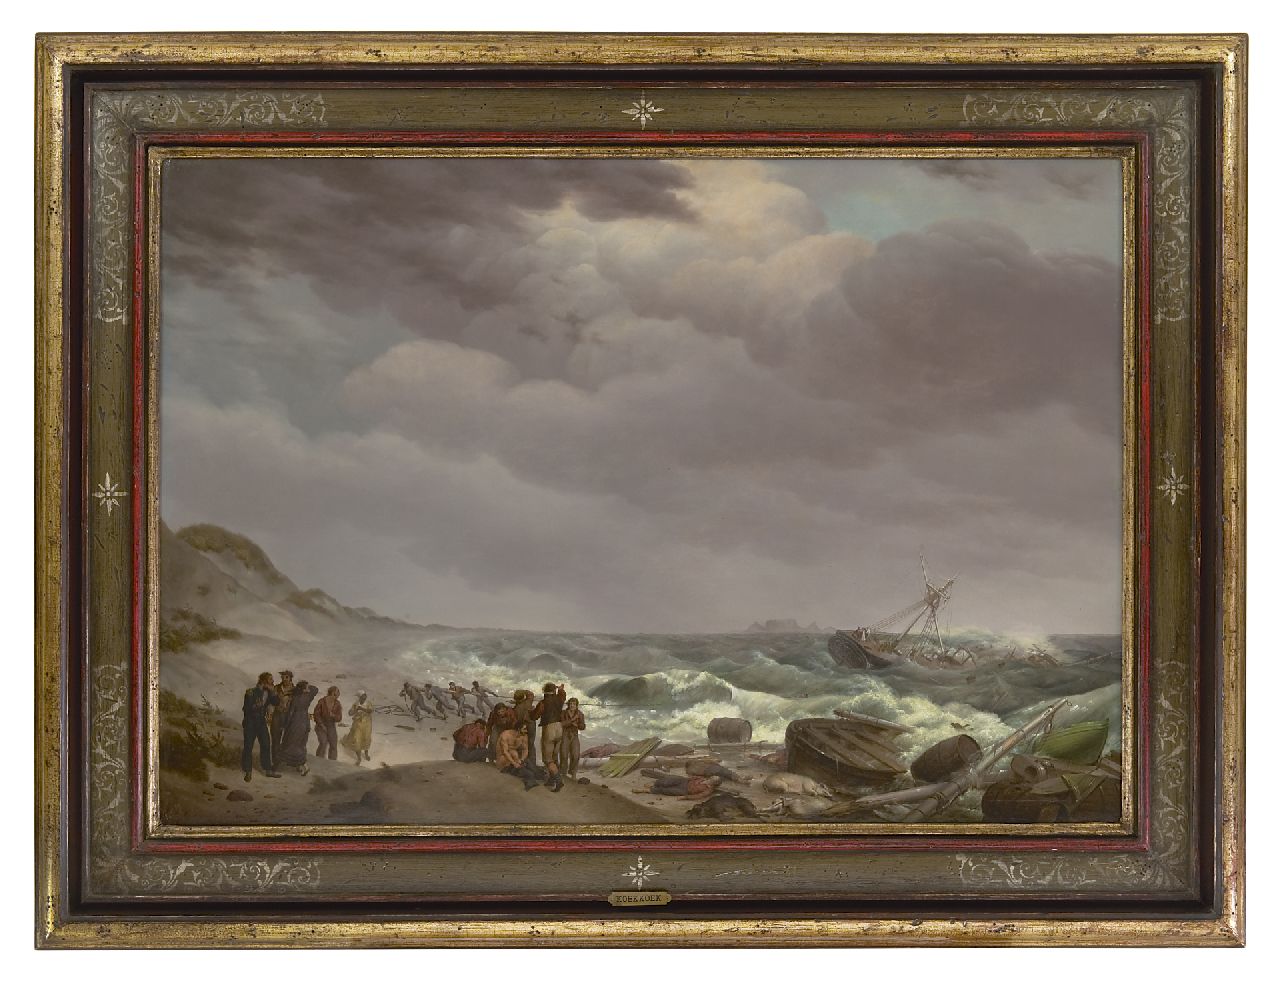 Koekkoek J.H.  | Johannes Hermanus Koekkoek | Paintings offered for sale | Shipwreck at the South African coast, Tsaarsbank, with the Table Mountain in the distance, oil on panel 57.4 x 82.8 cm, signed l.r. and dated 1824 (vague)